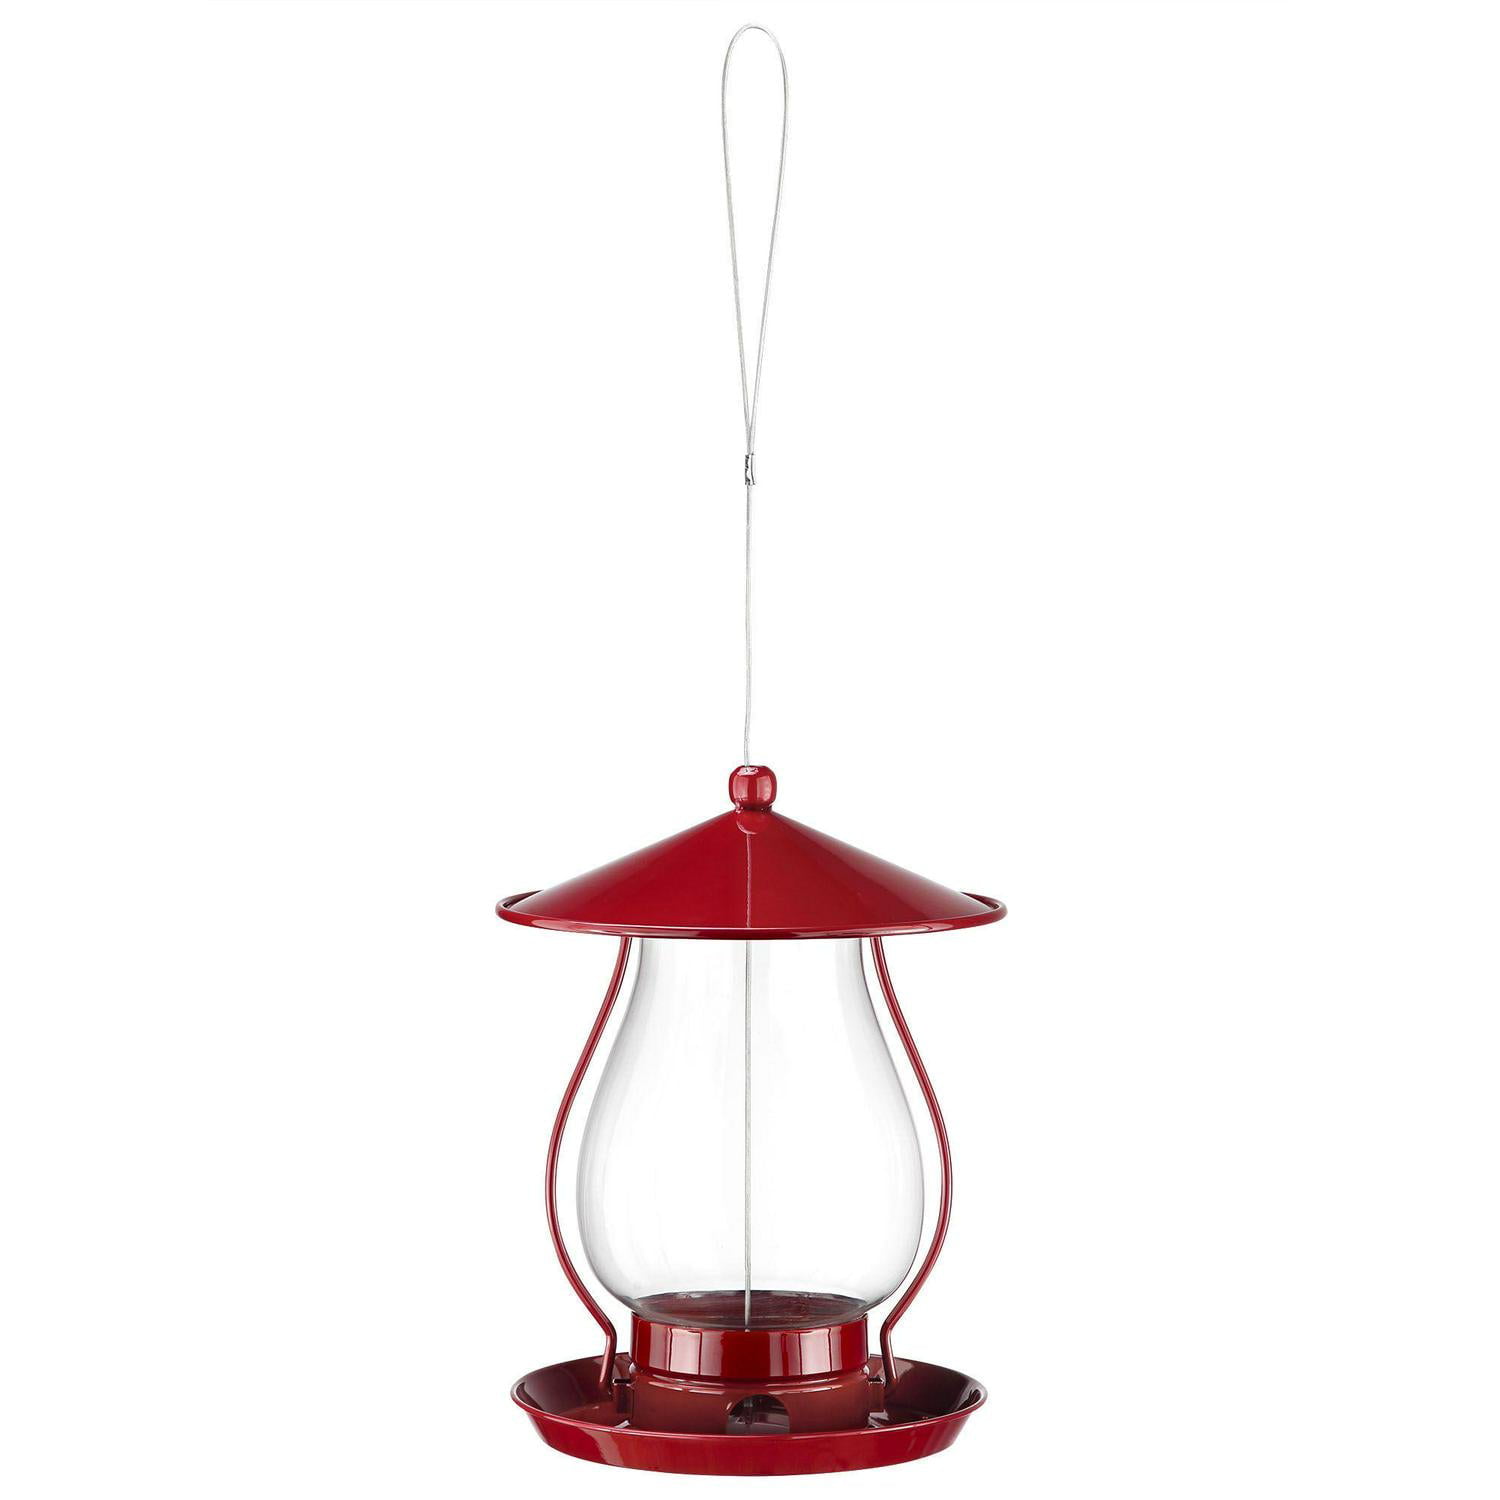 NEW Royal Wing Hummingbird Feeder Clear Glass with Red Metal Hanger